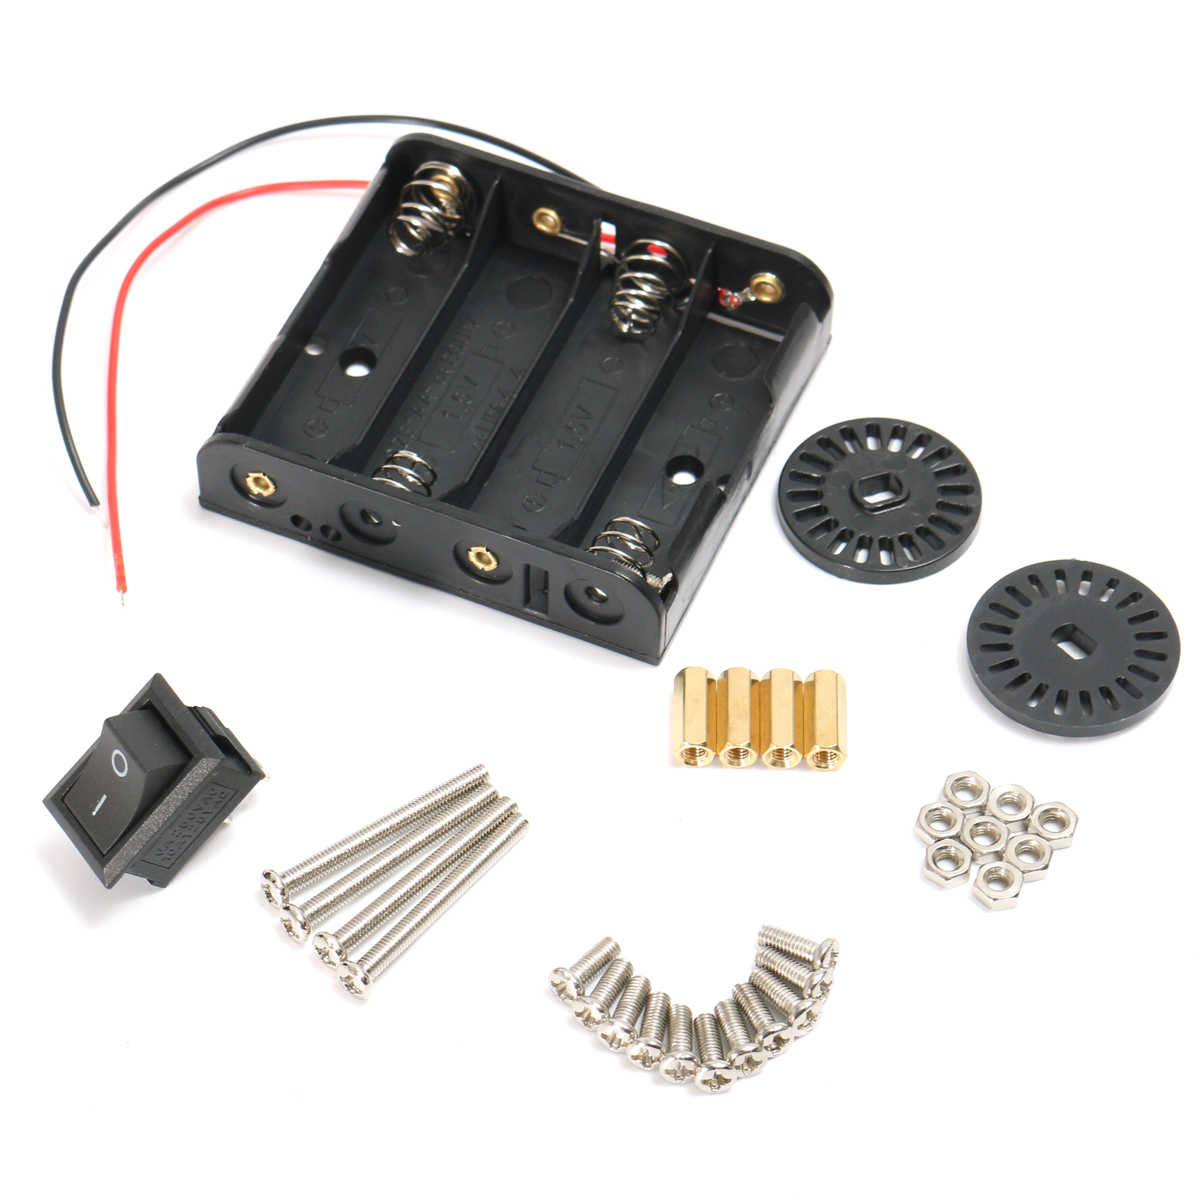 Geekcreitreg-DIY-L298N-2WD-Ultrasonic-Smart-Tracking-Moteur-Robot-Car-Kit-for-Arduino---products-tha-1155139-5